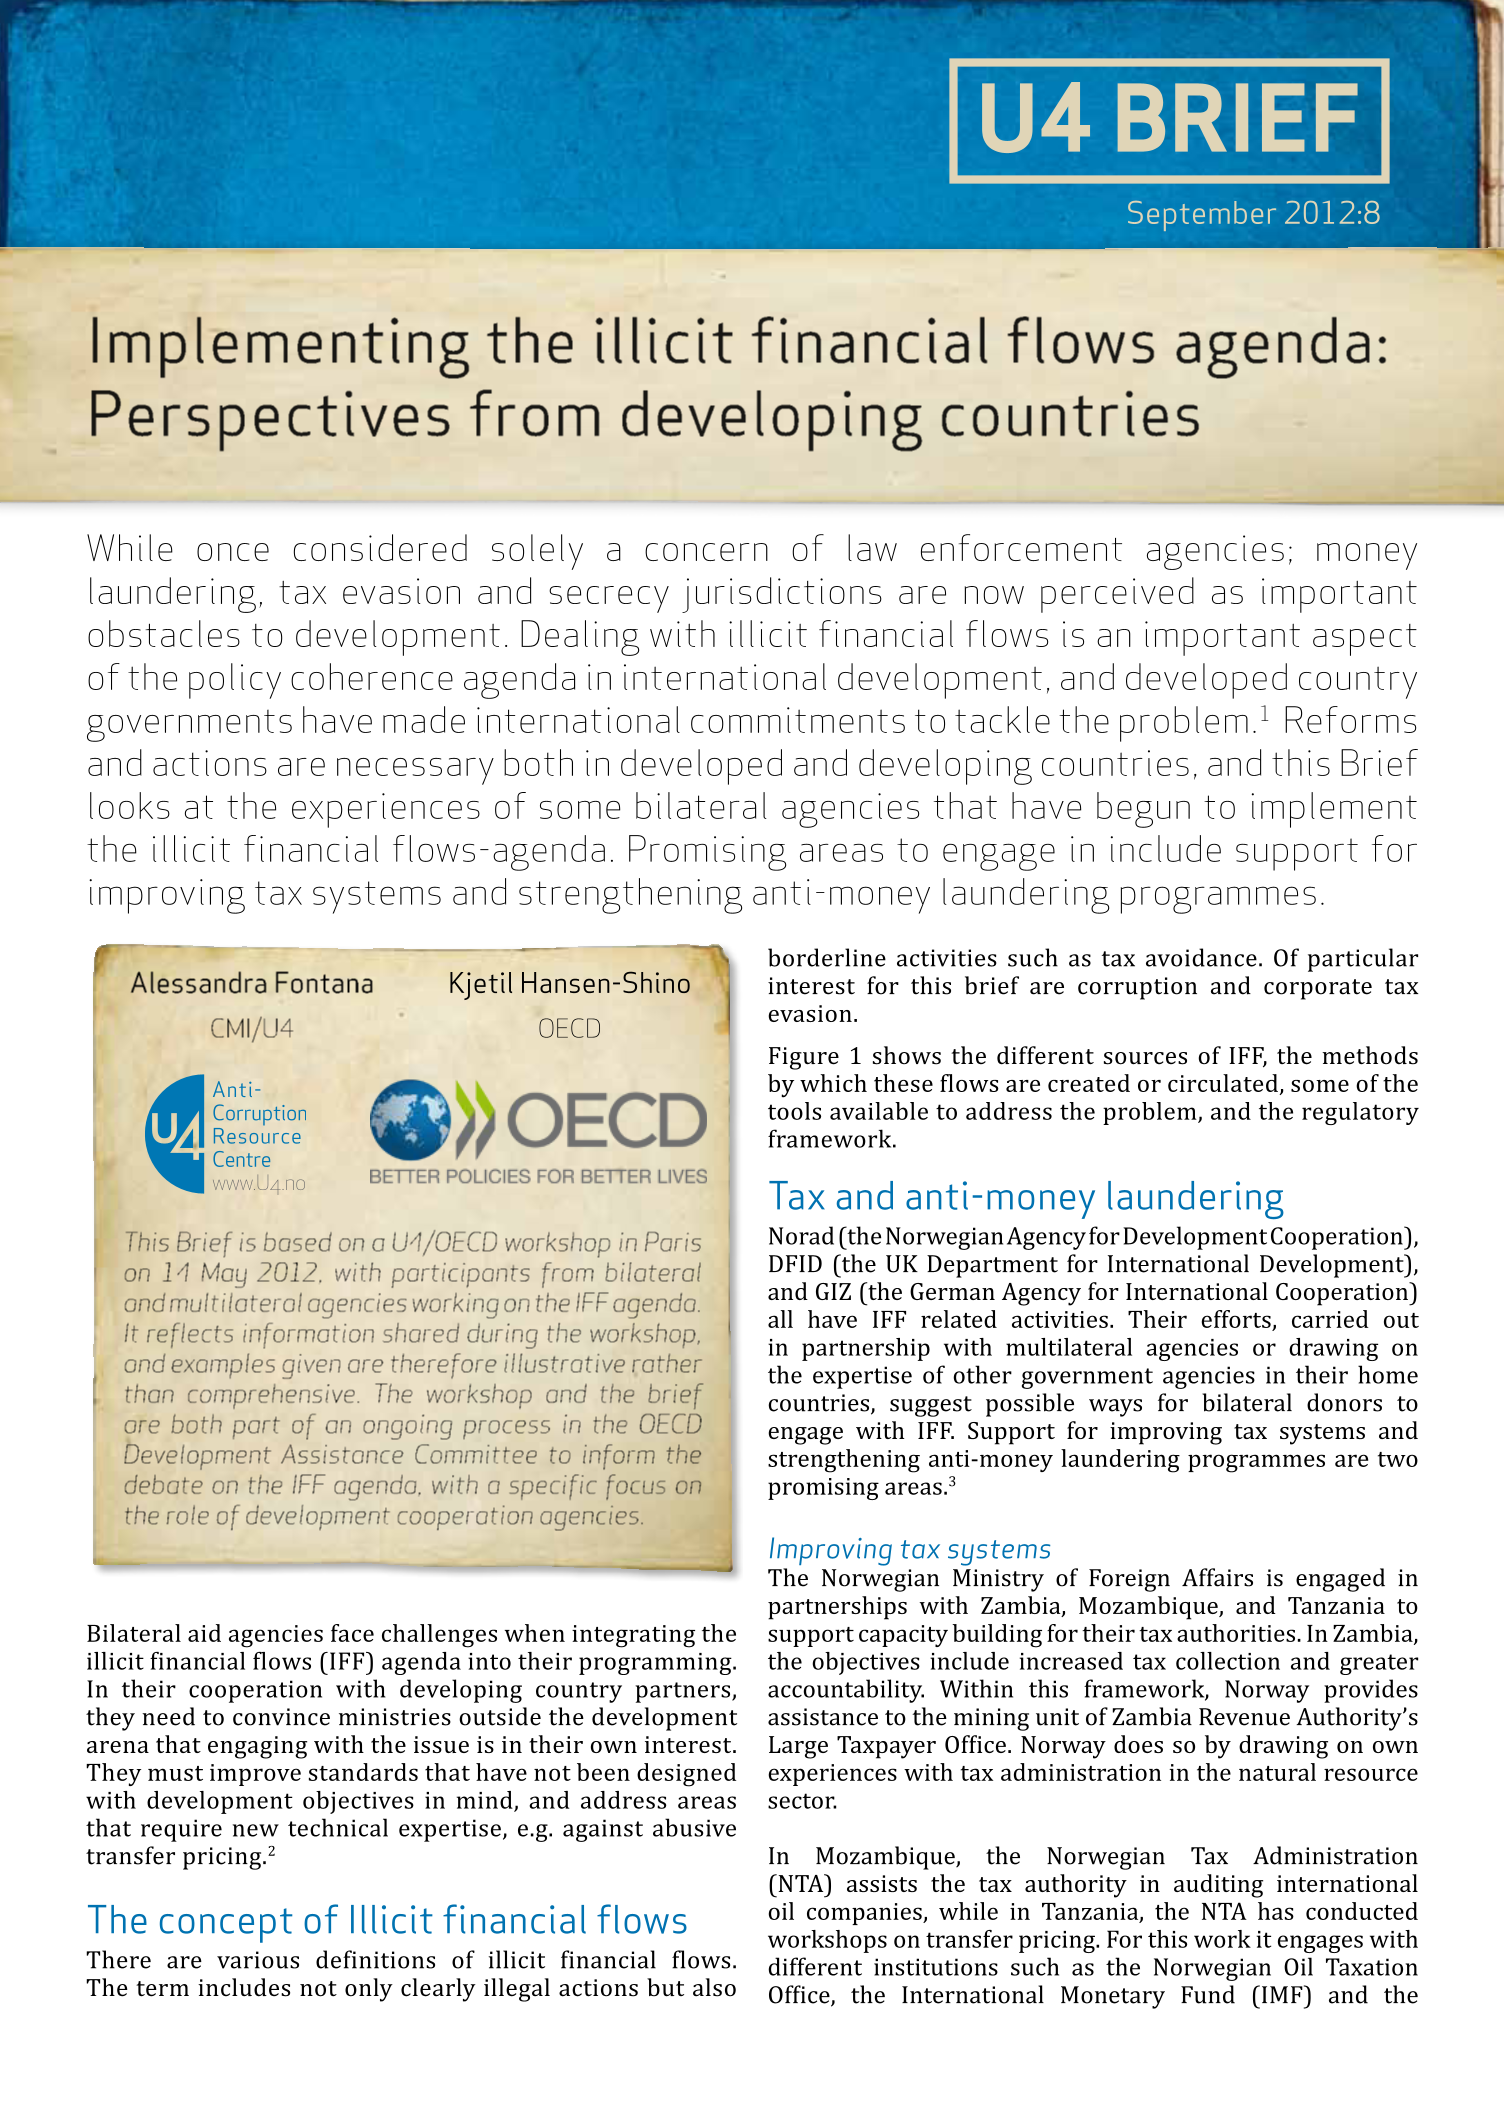 Implementing the illicit financial flows agenda: Perspectives from developing countries